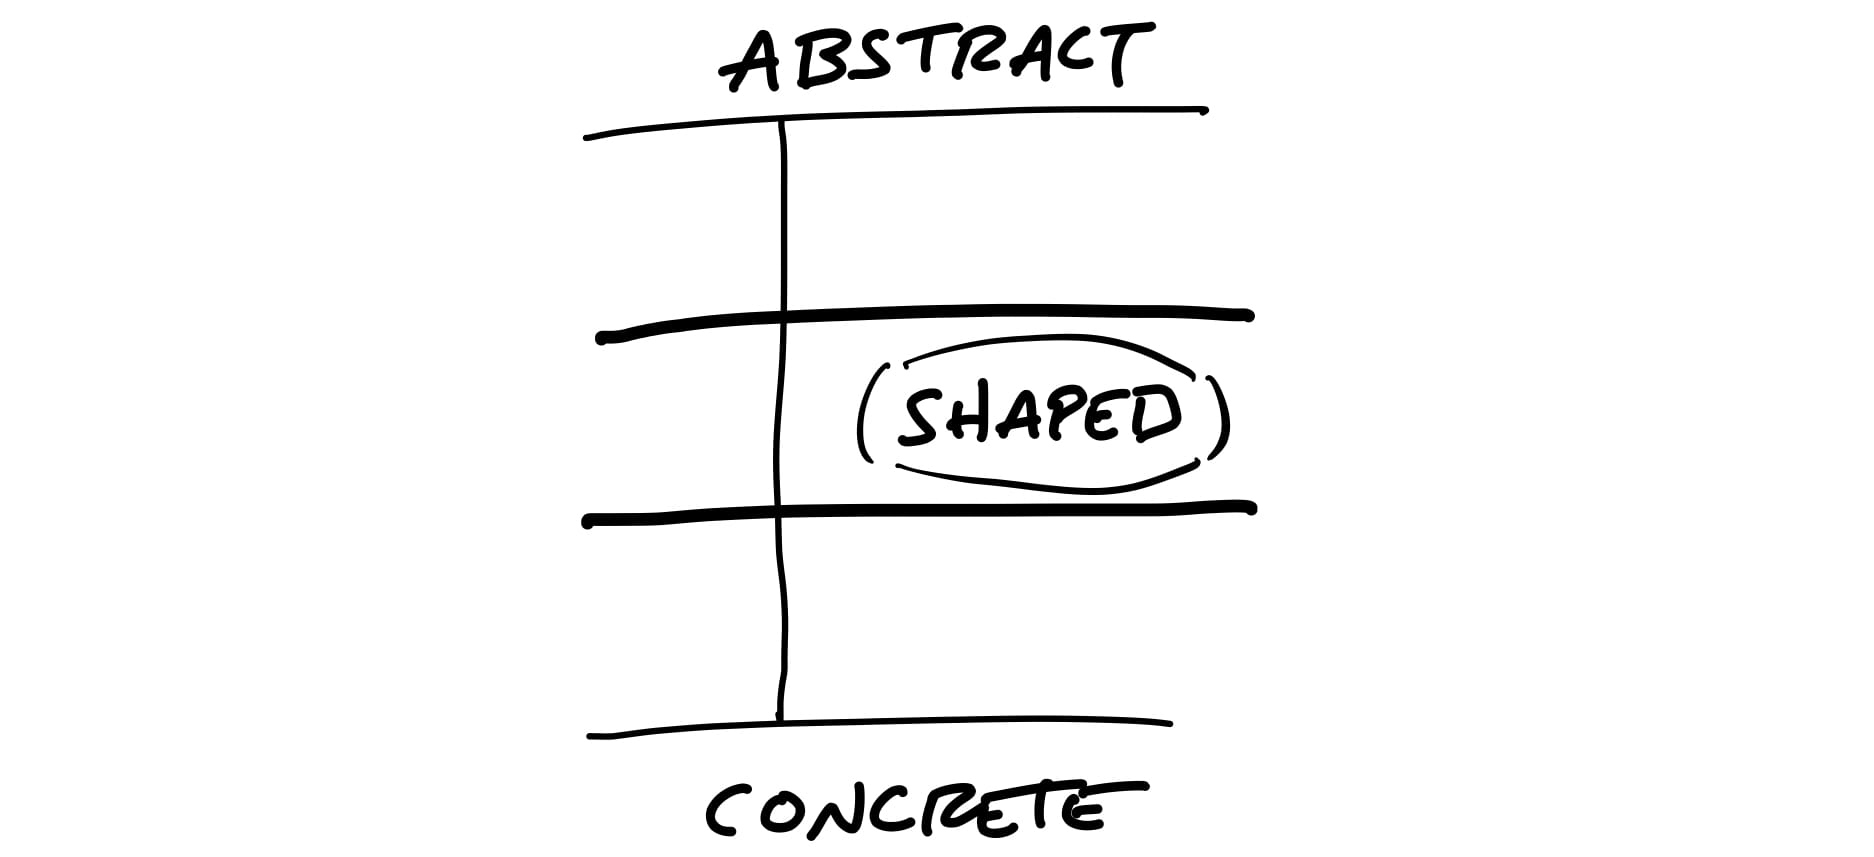 shape-up-levels-of-abstraction